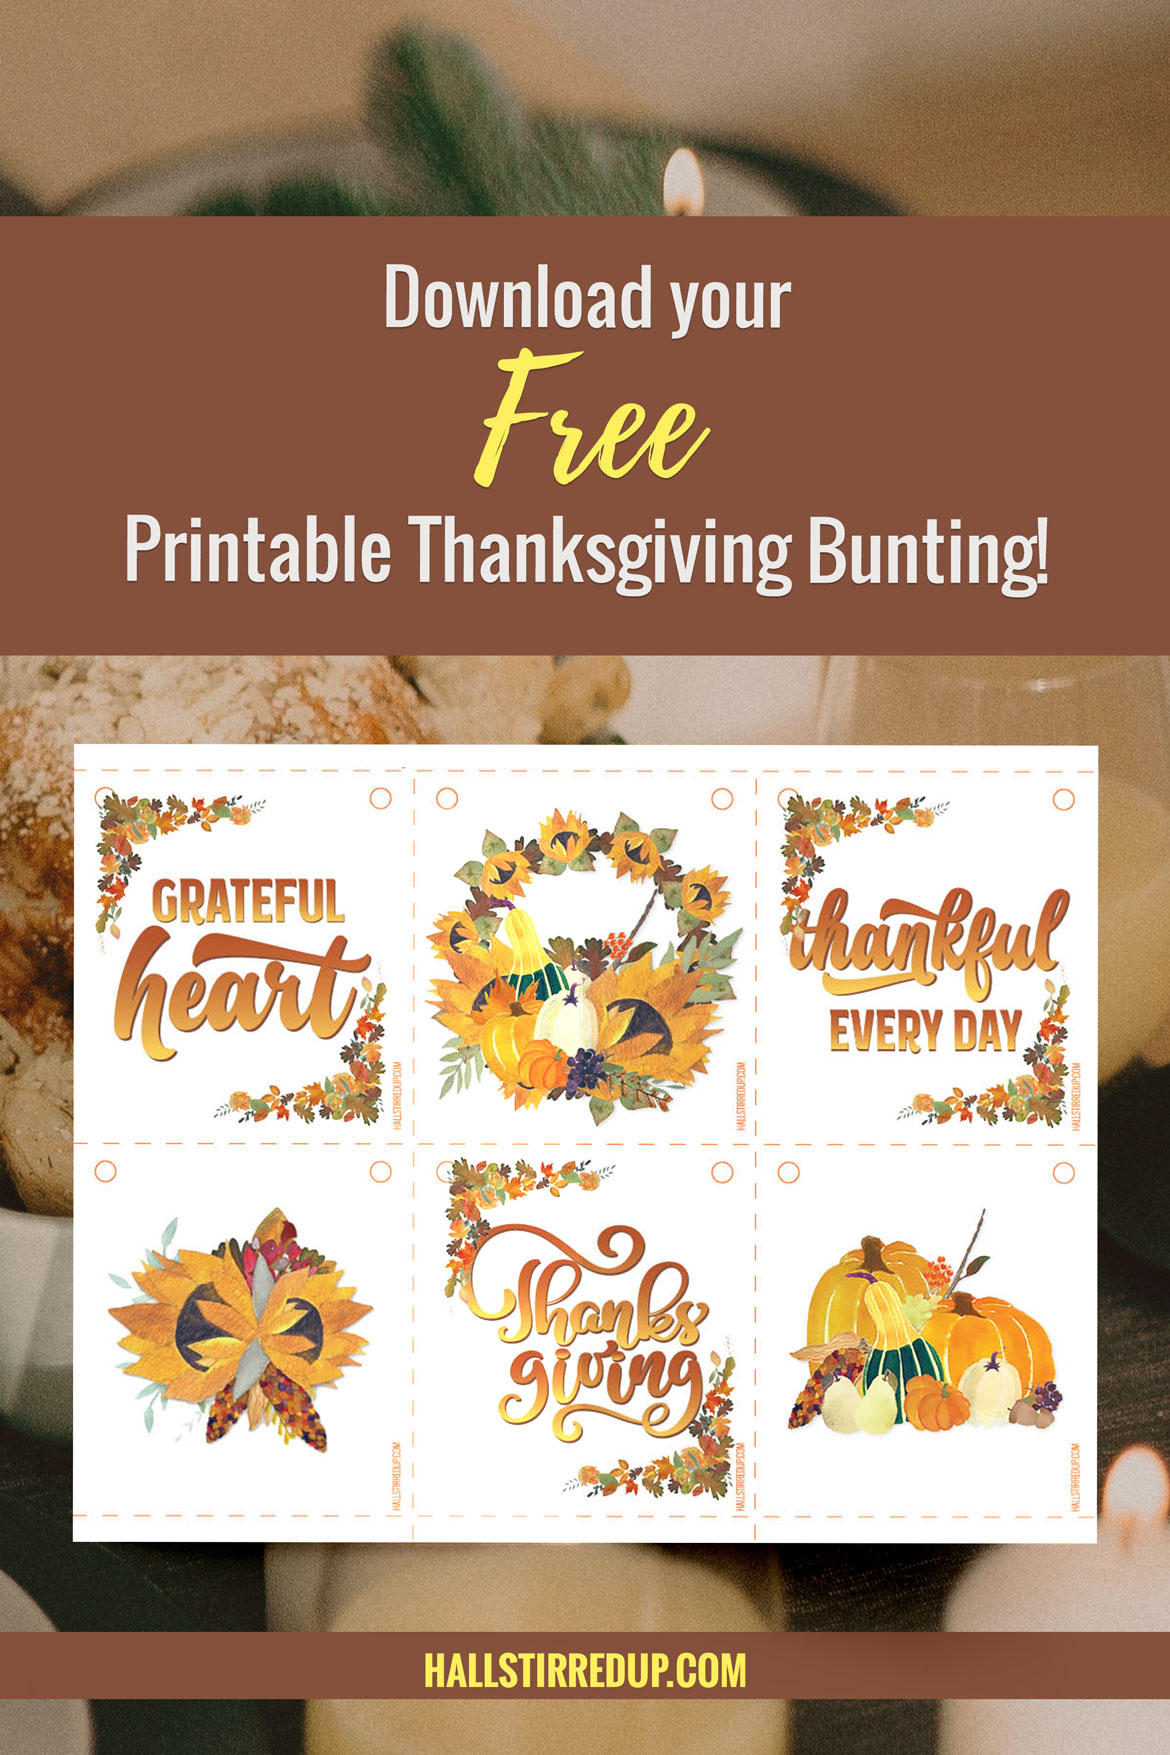 Celebrate with fun and free Thanksgiving bunting!